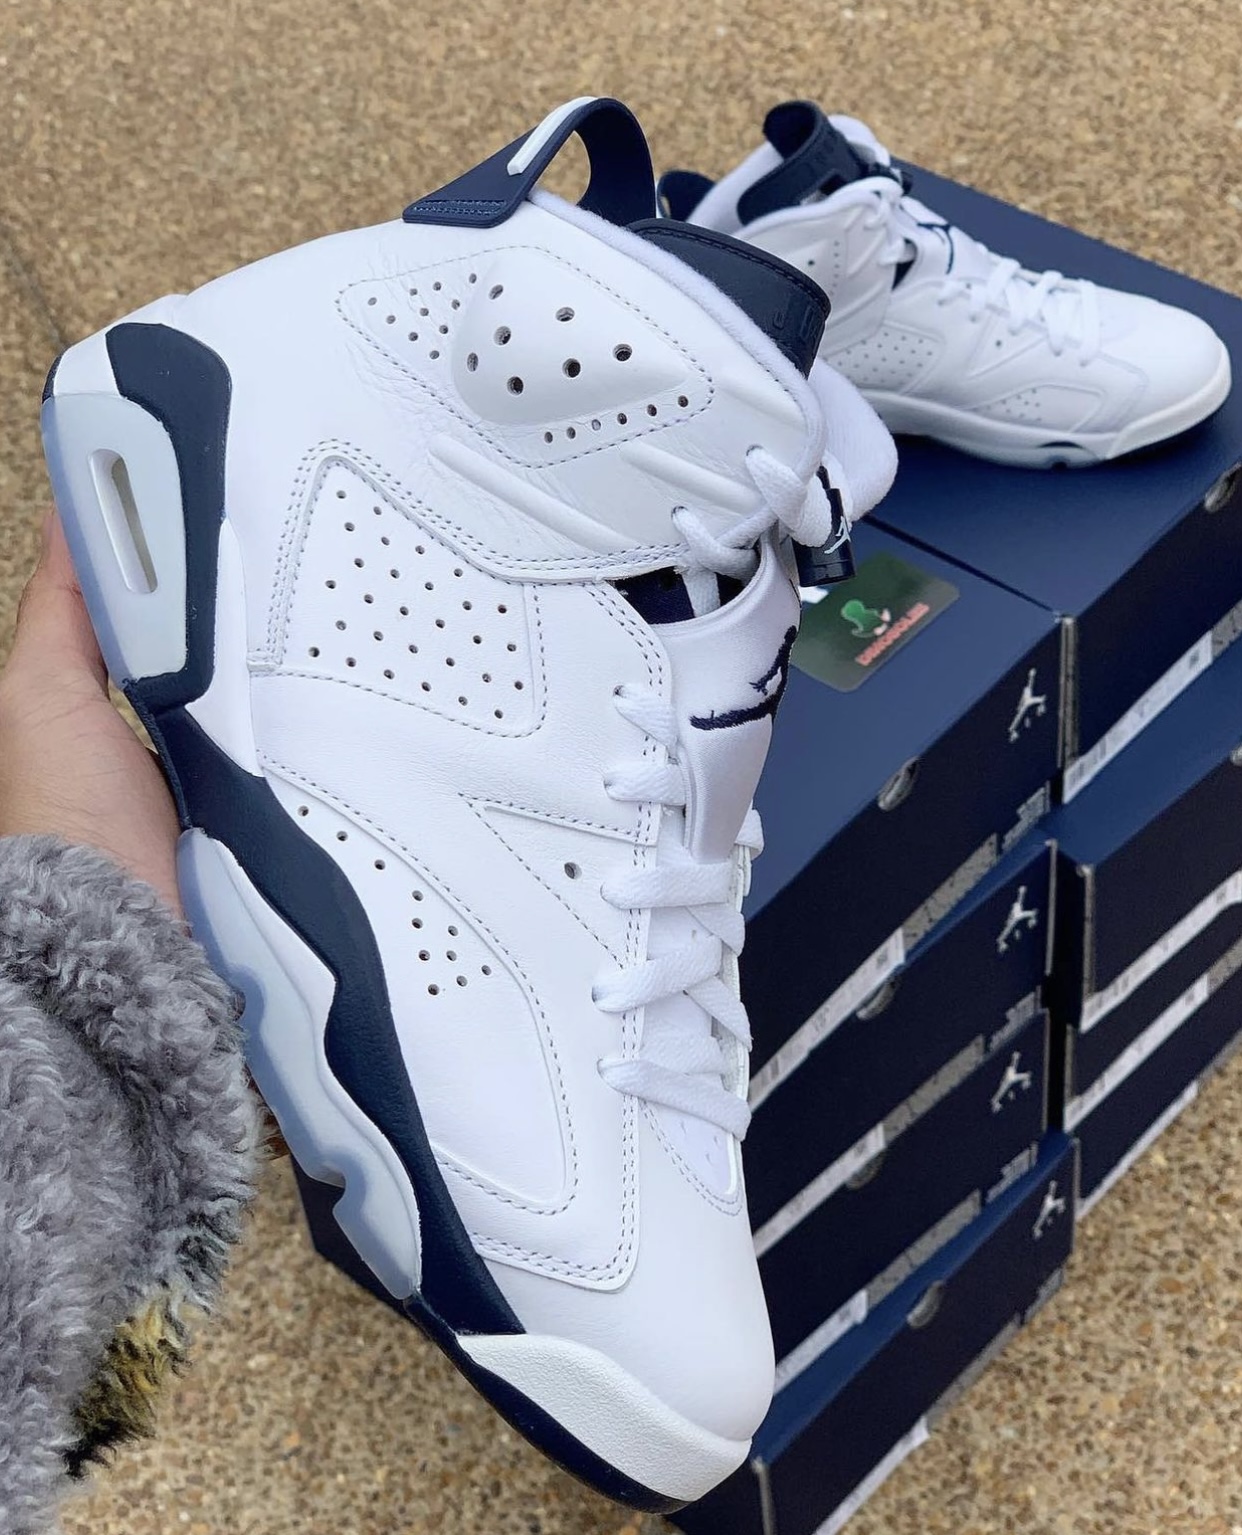 blue and white jordan 6 release date